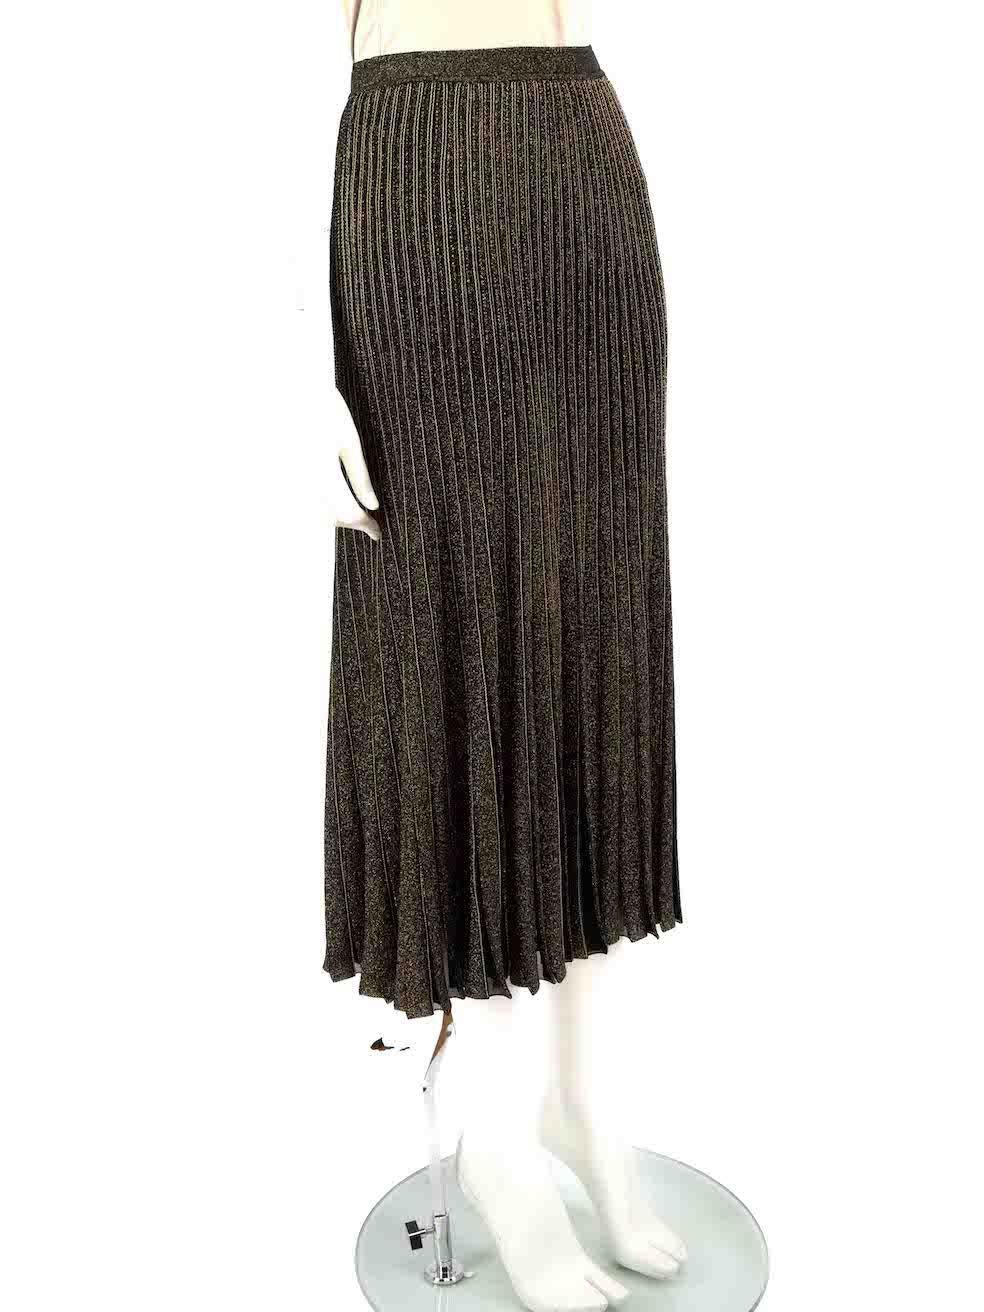 CONDITION is Very good. Hardly any visible wear to skirt is evident on this used Roberto Cavalli designer resale item.
 
 
 
 Details
 
 
 Gold metallic
 
 Viscose
 
 Pleated knit skirt
 
 Gold thread
 
 Midi
 
 Elasticated waistband
 
 
 
 
 
 Made